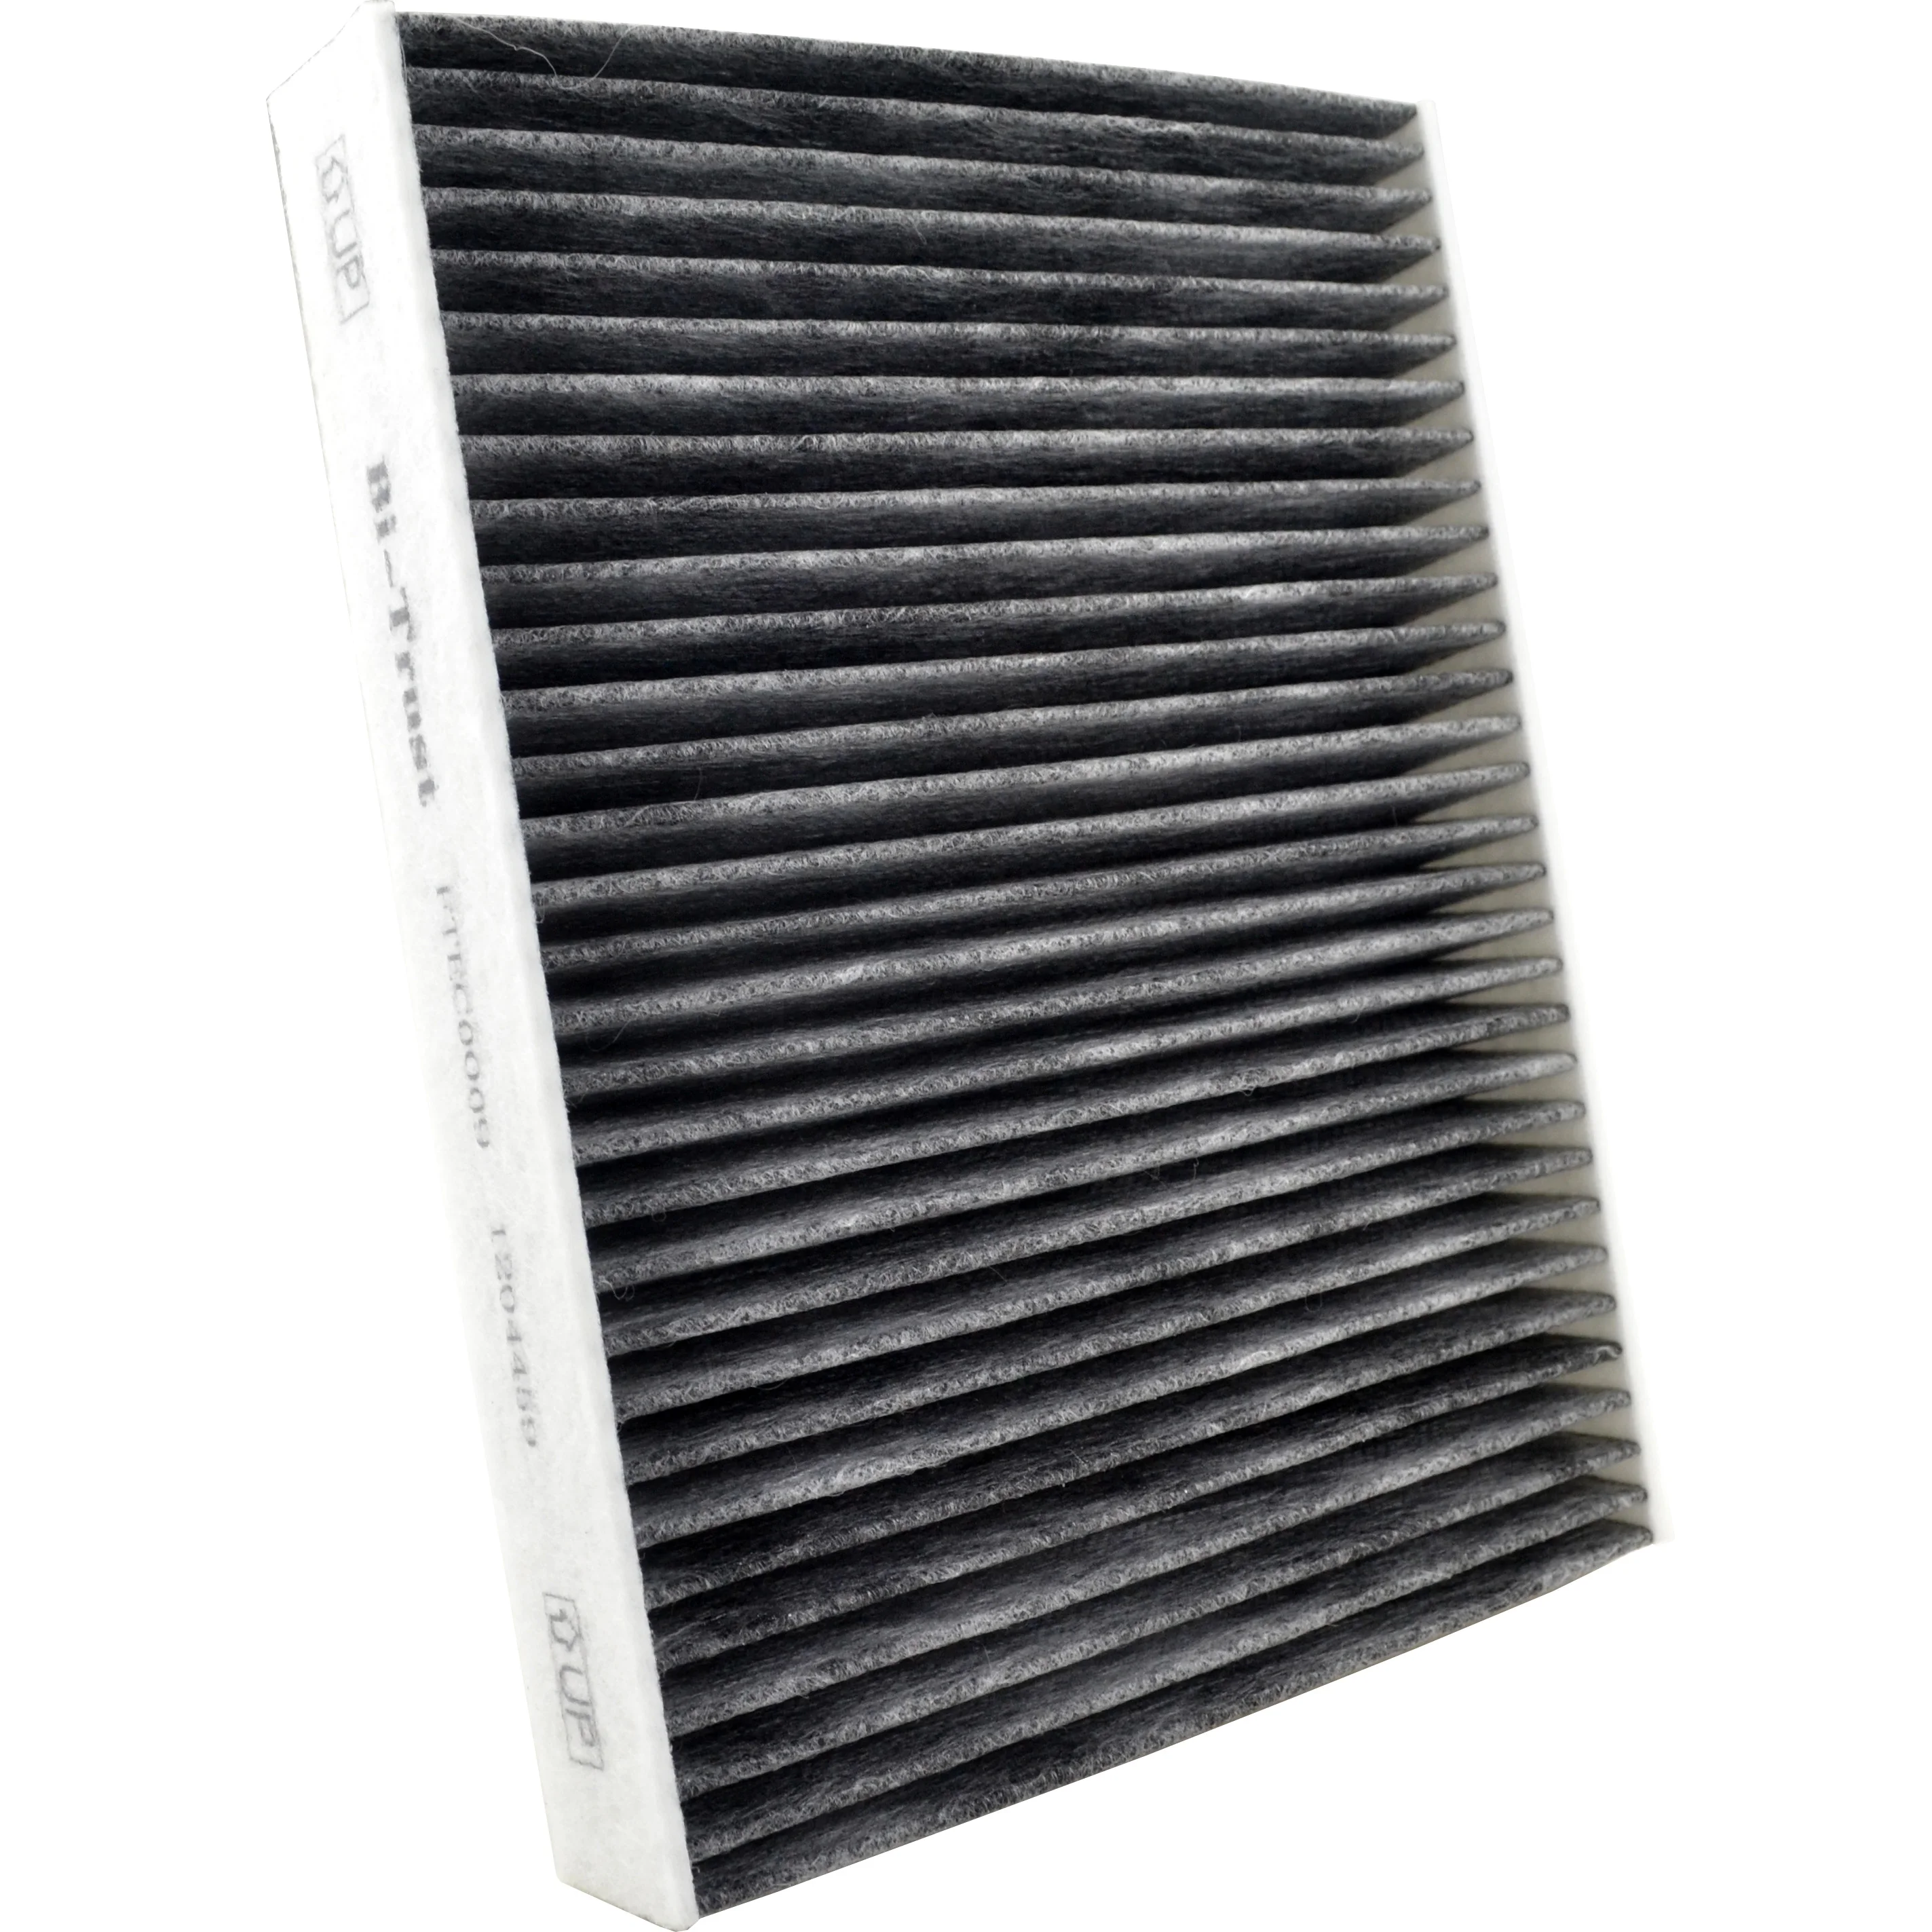 Ju_ 1204459 Cabin Air Filter for Ford Fiesta V Jh_,Jd_ Fusion